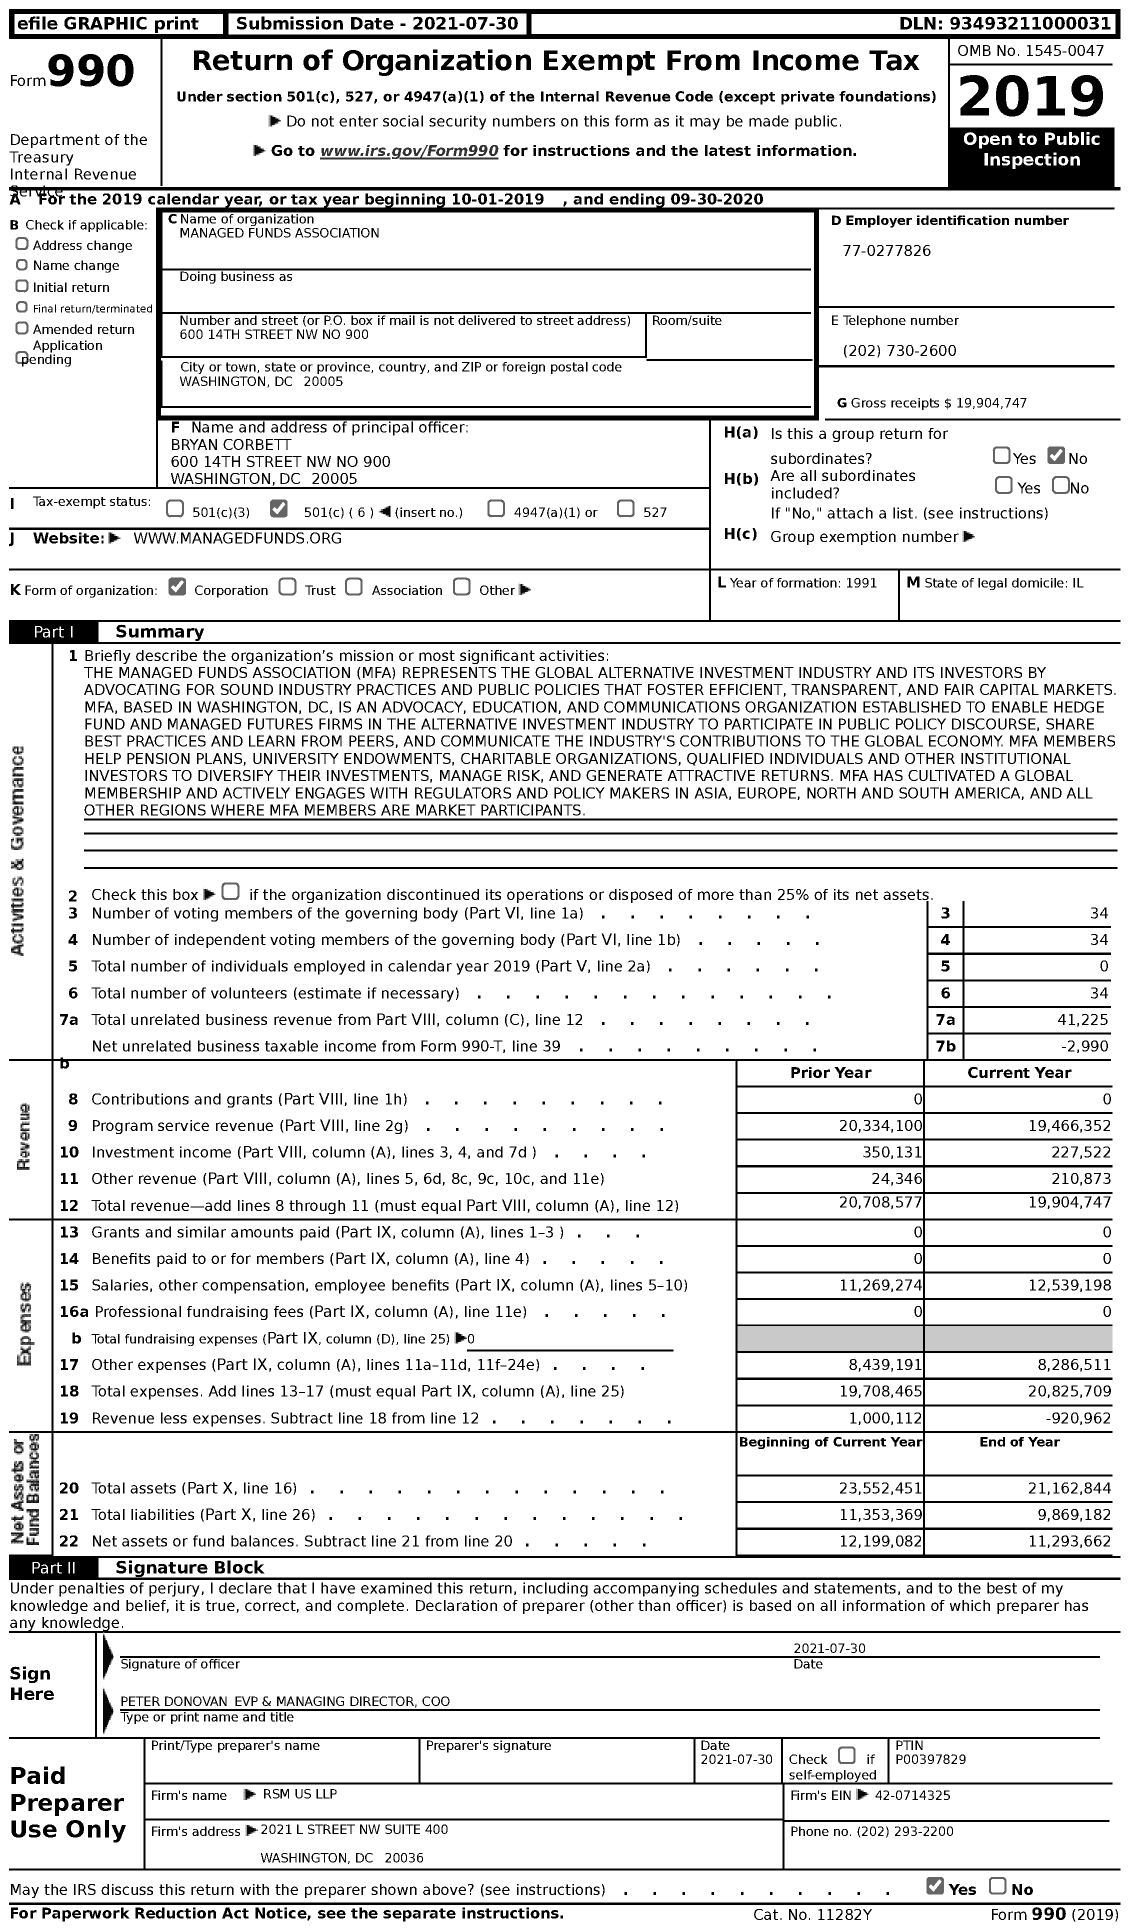 Image of first page of 2019 Form 990 for Managed Funds Association (MFA)